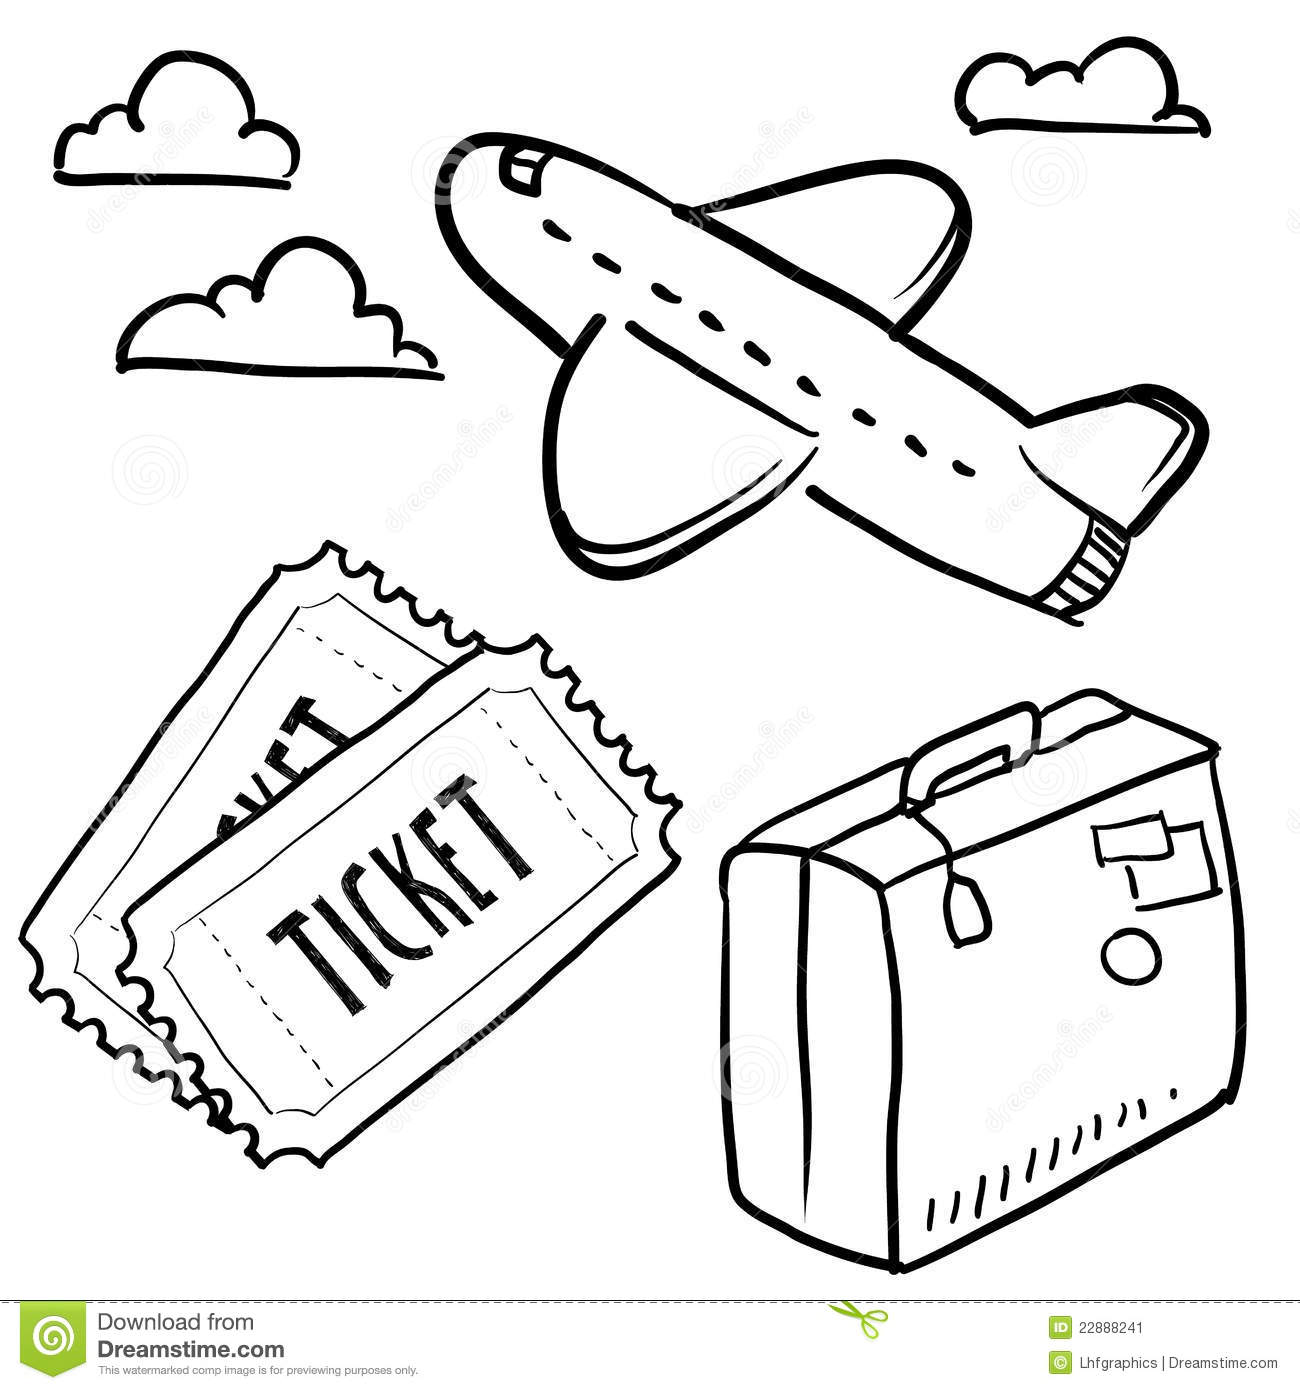 Air Travel Objects Sketch